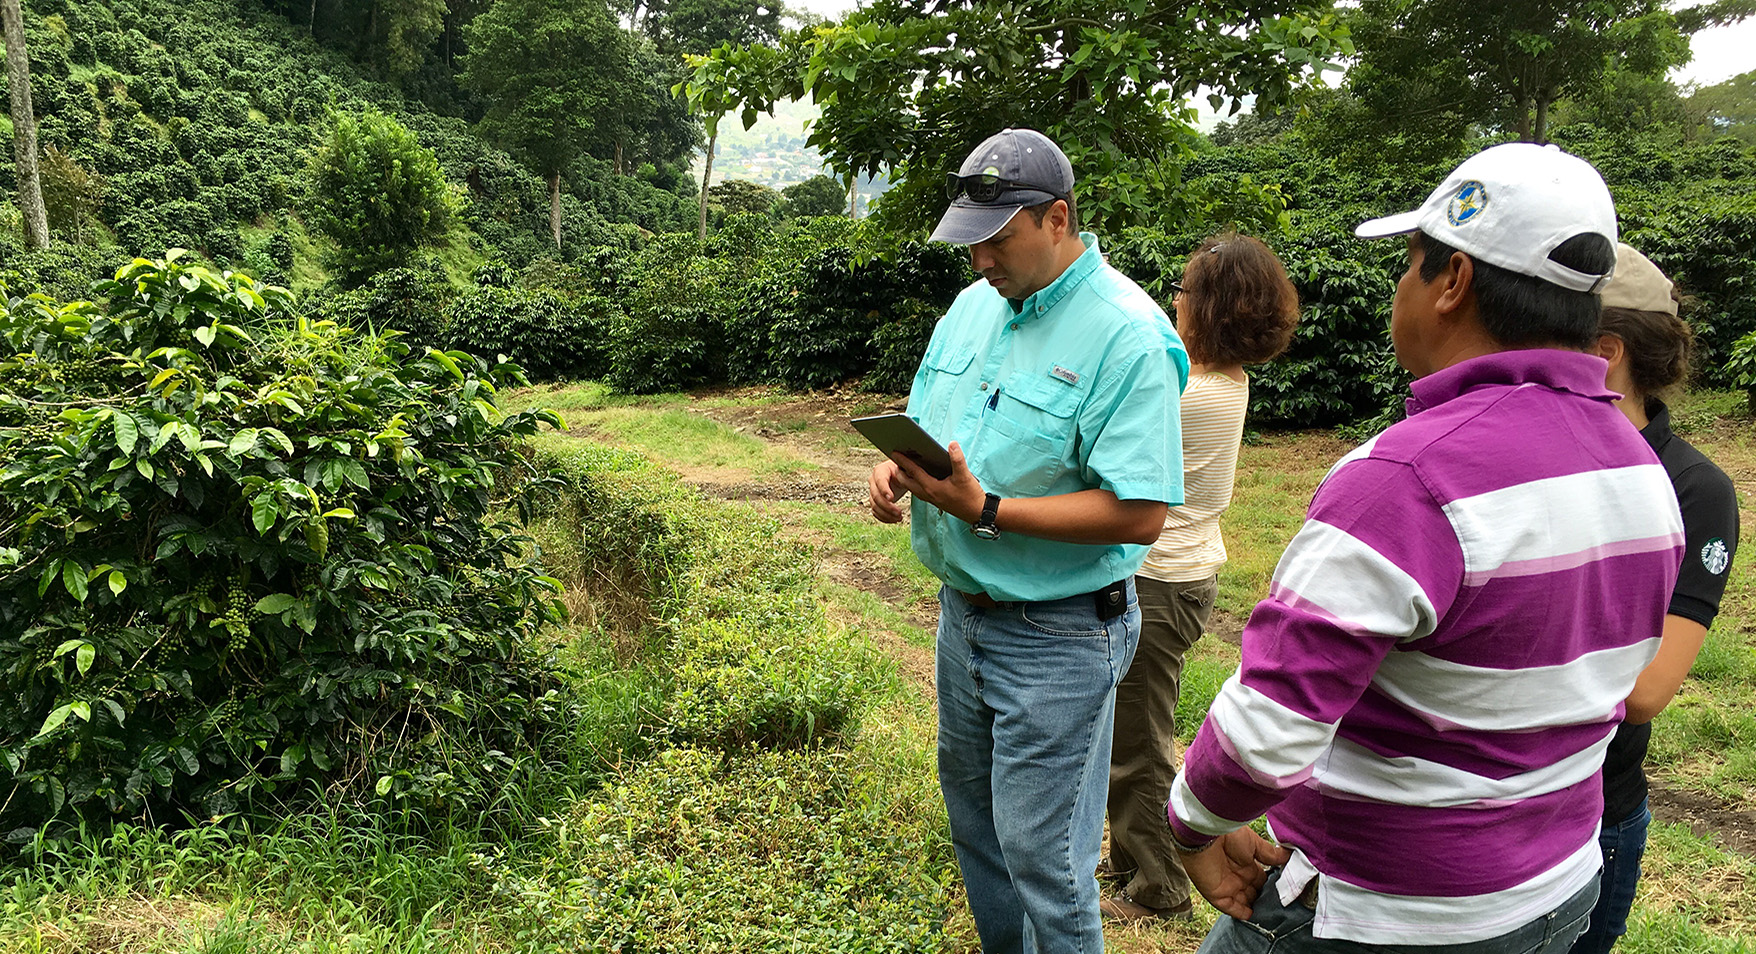 An inspector for Starbucks C.A.F.E. verification process using a table with Green River software to inspect a farm.